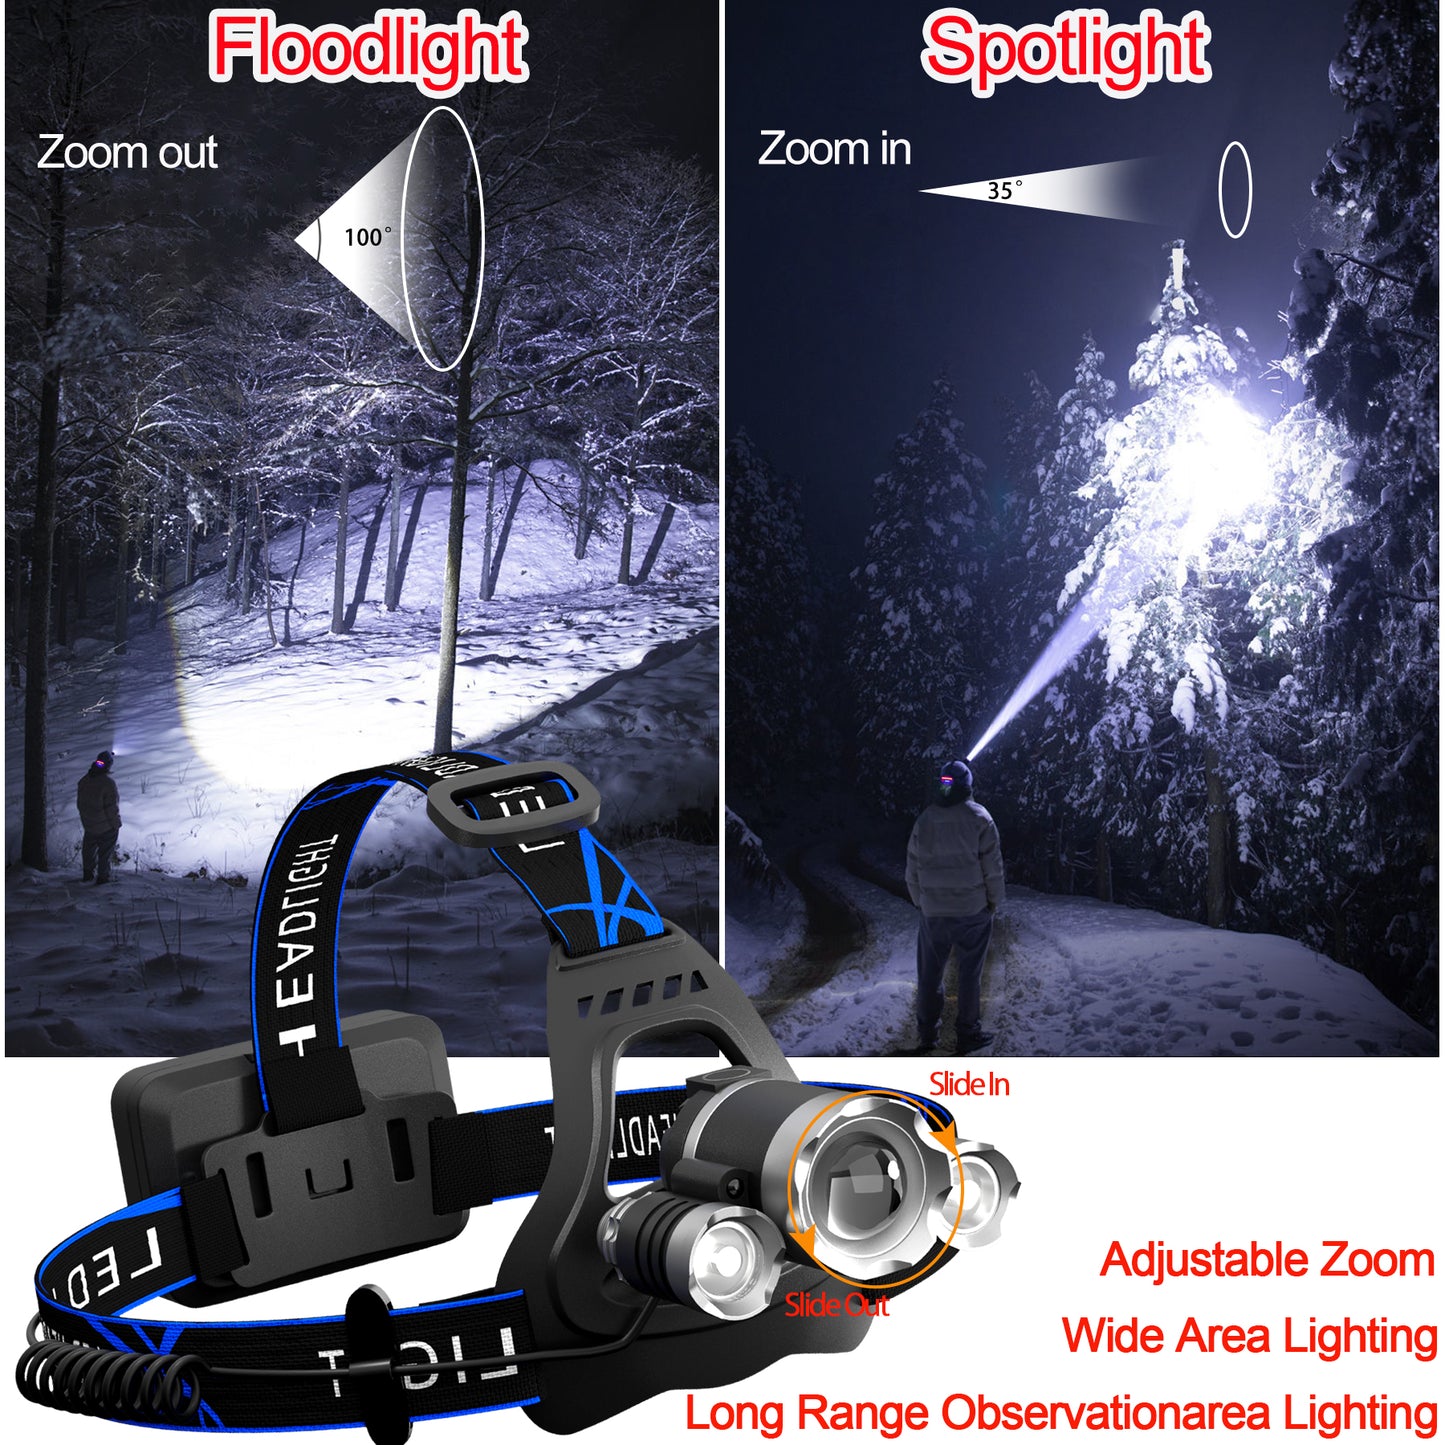 flashlights for camping, flashlights for hiking, rechargeable flashlights high lumens, Helius, headlamps for adults rechargeable, headlamp flashlight, running headlamp, headlamp camping